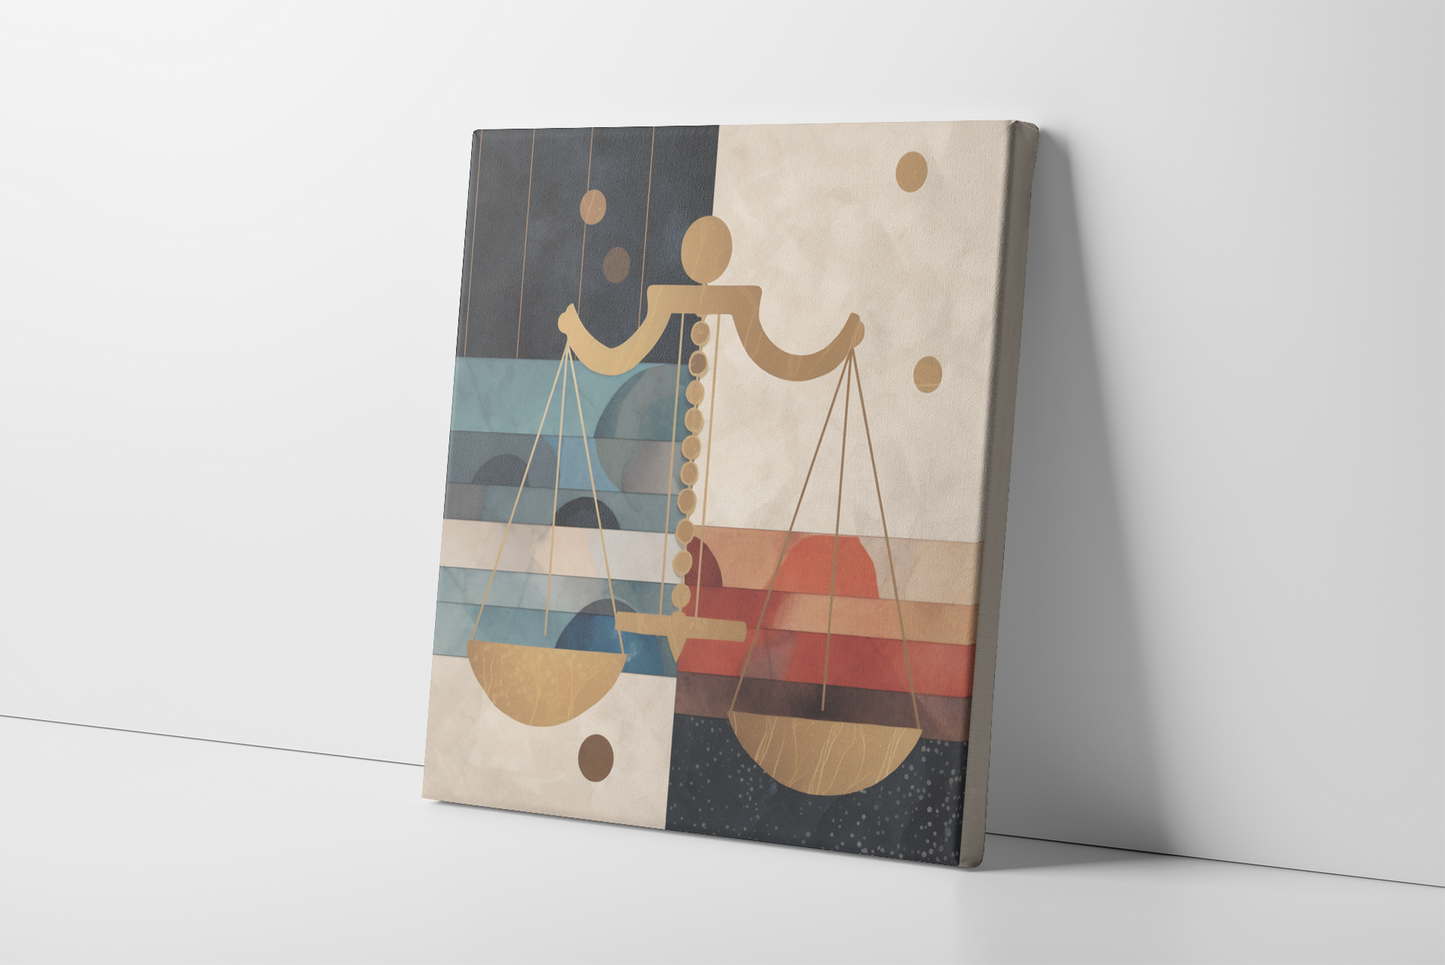 Scales of Justice Canvas Wall Art, Scales of Justice Art, Law Office Decor, Gift for Lawyer, Attorney Canvas Art